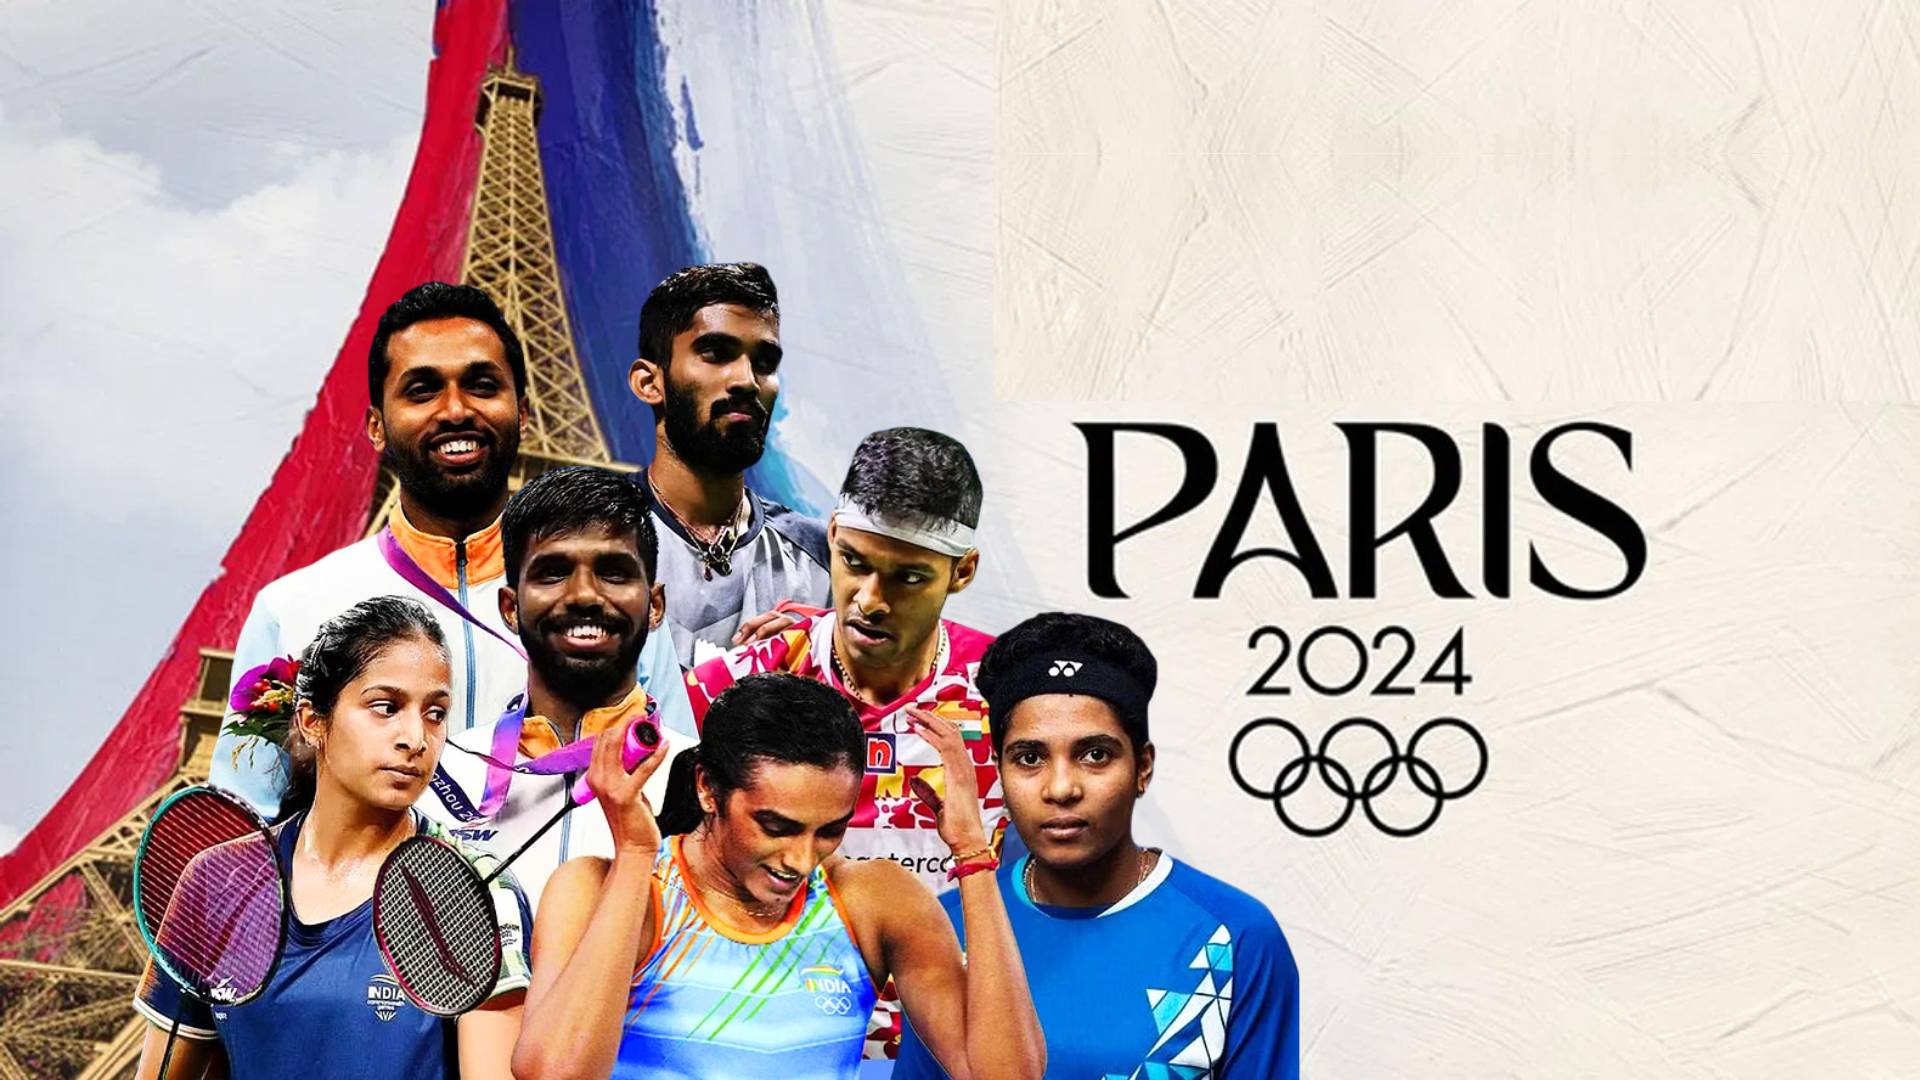 Paris Olympics 2024: From PV Sindhu To Rohan Bopanna These Indian Star Athletes Will Lead Parade of Nations